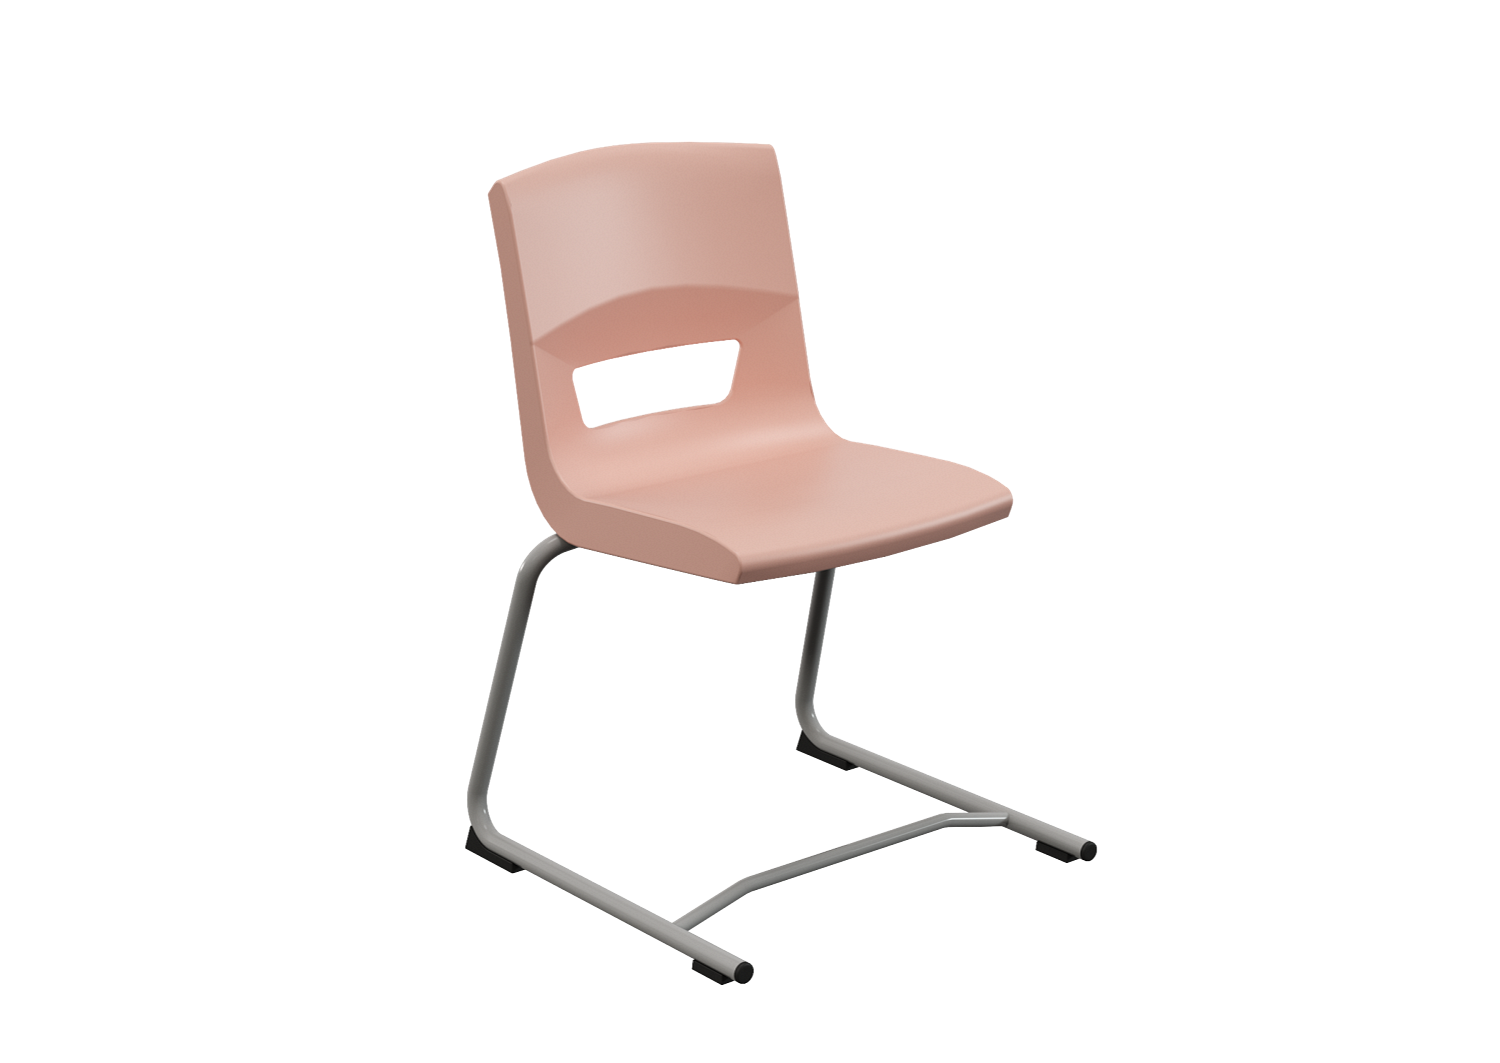 Postura reverse cantilevedr chair for classrom and kitchen rose blossom